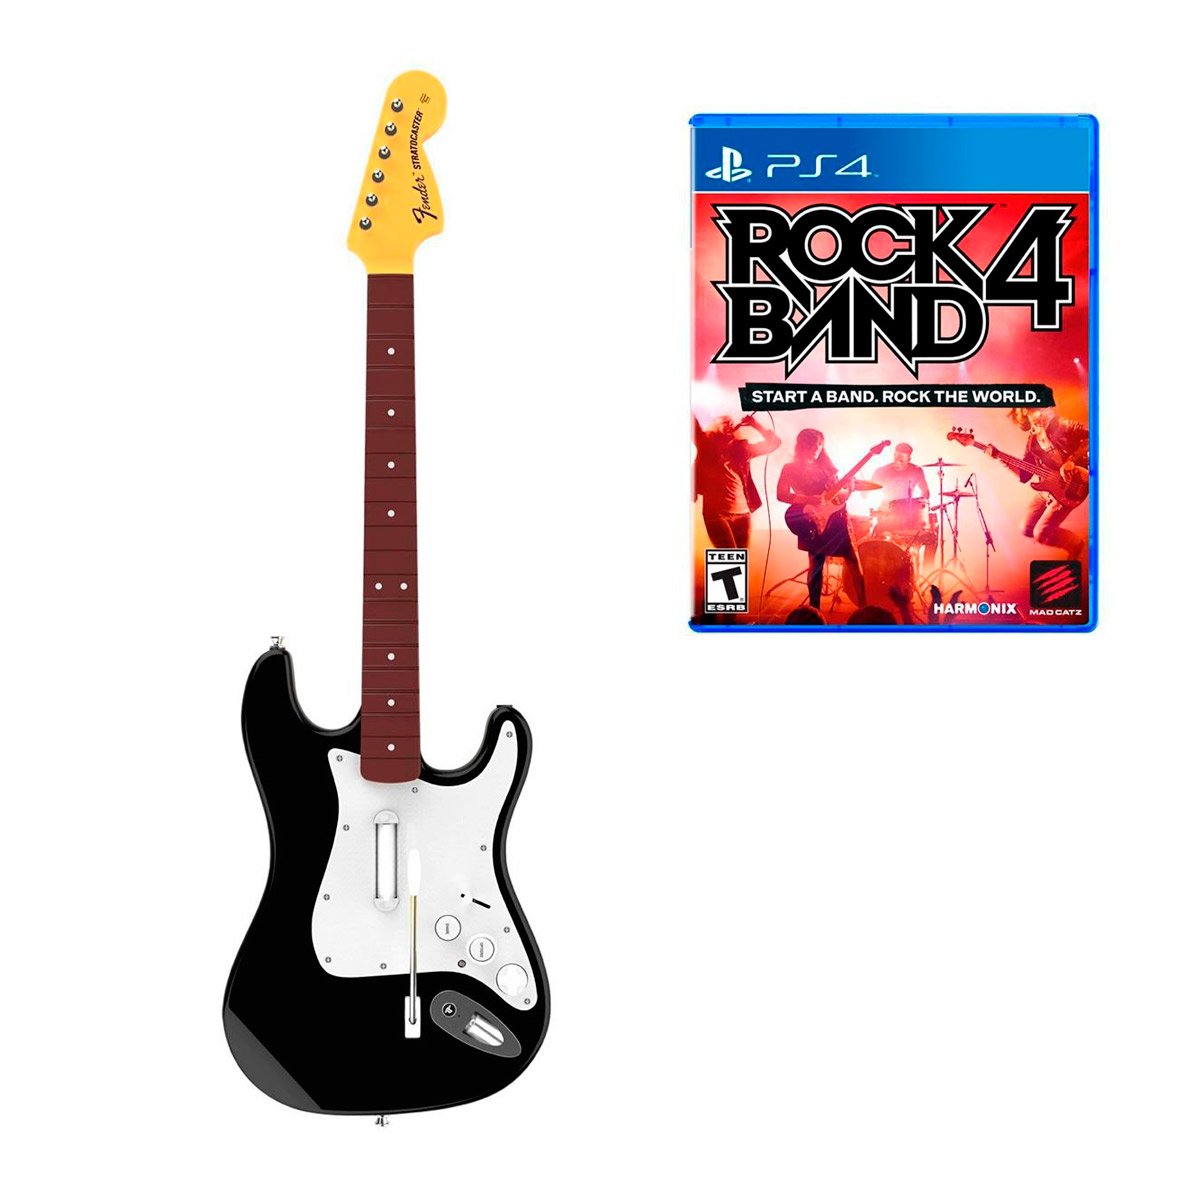 rock band 4 ps4 download free